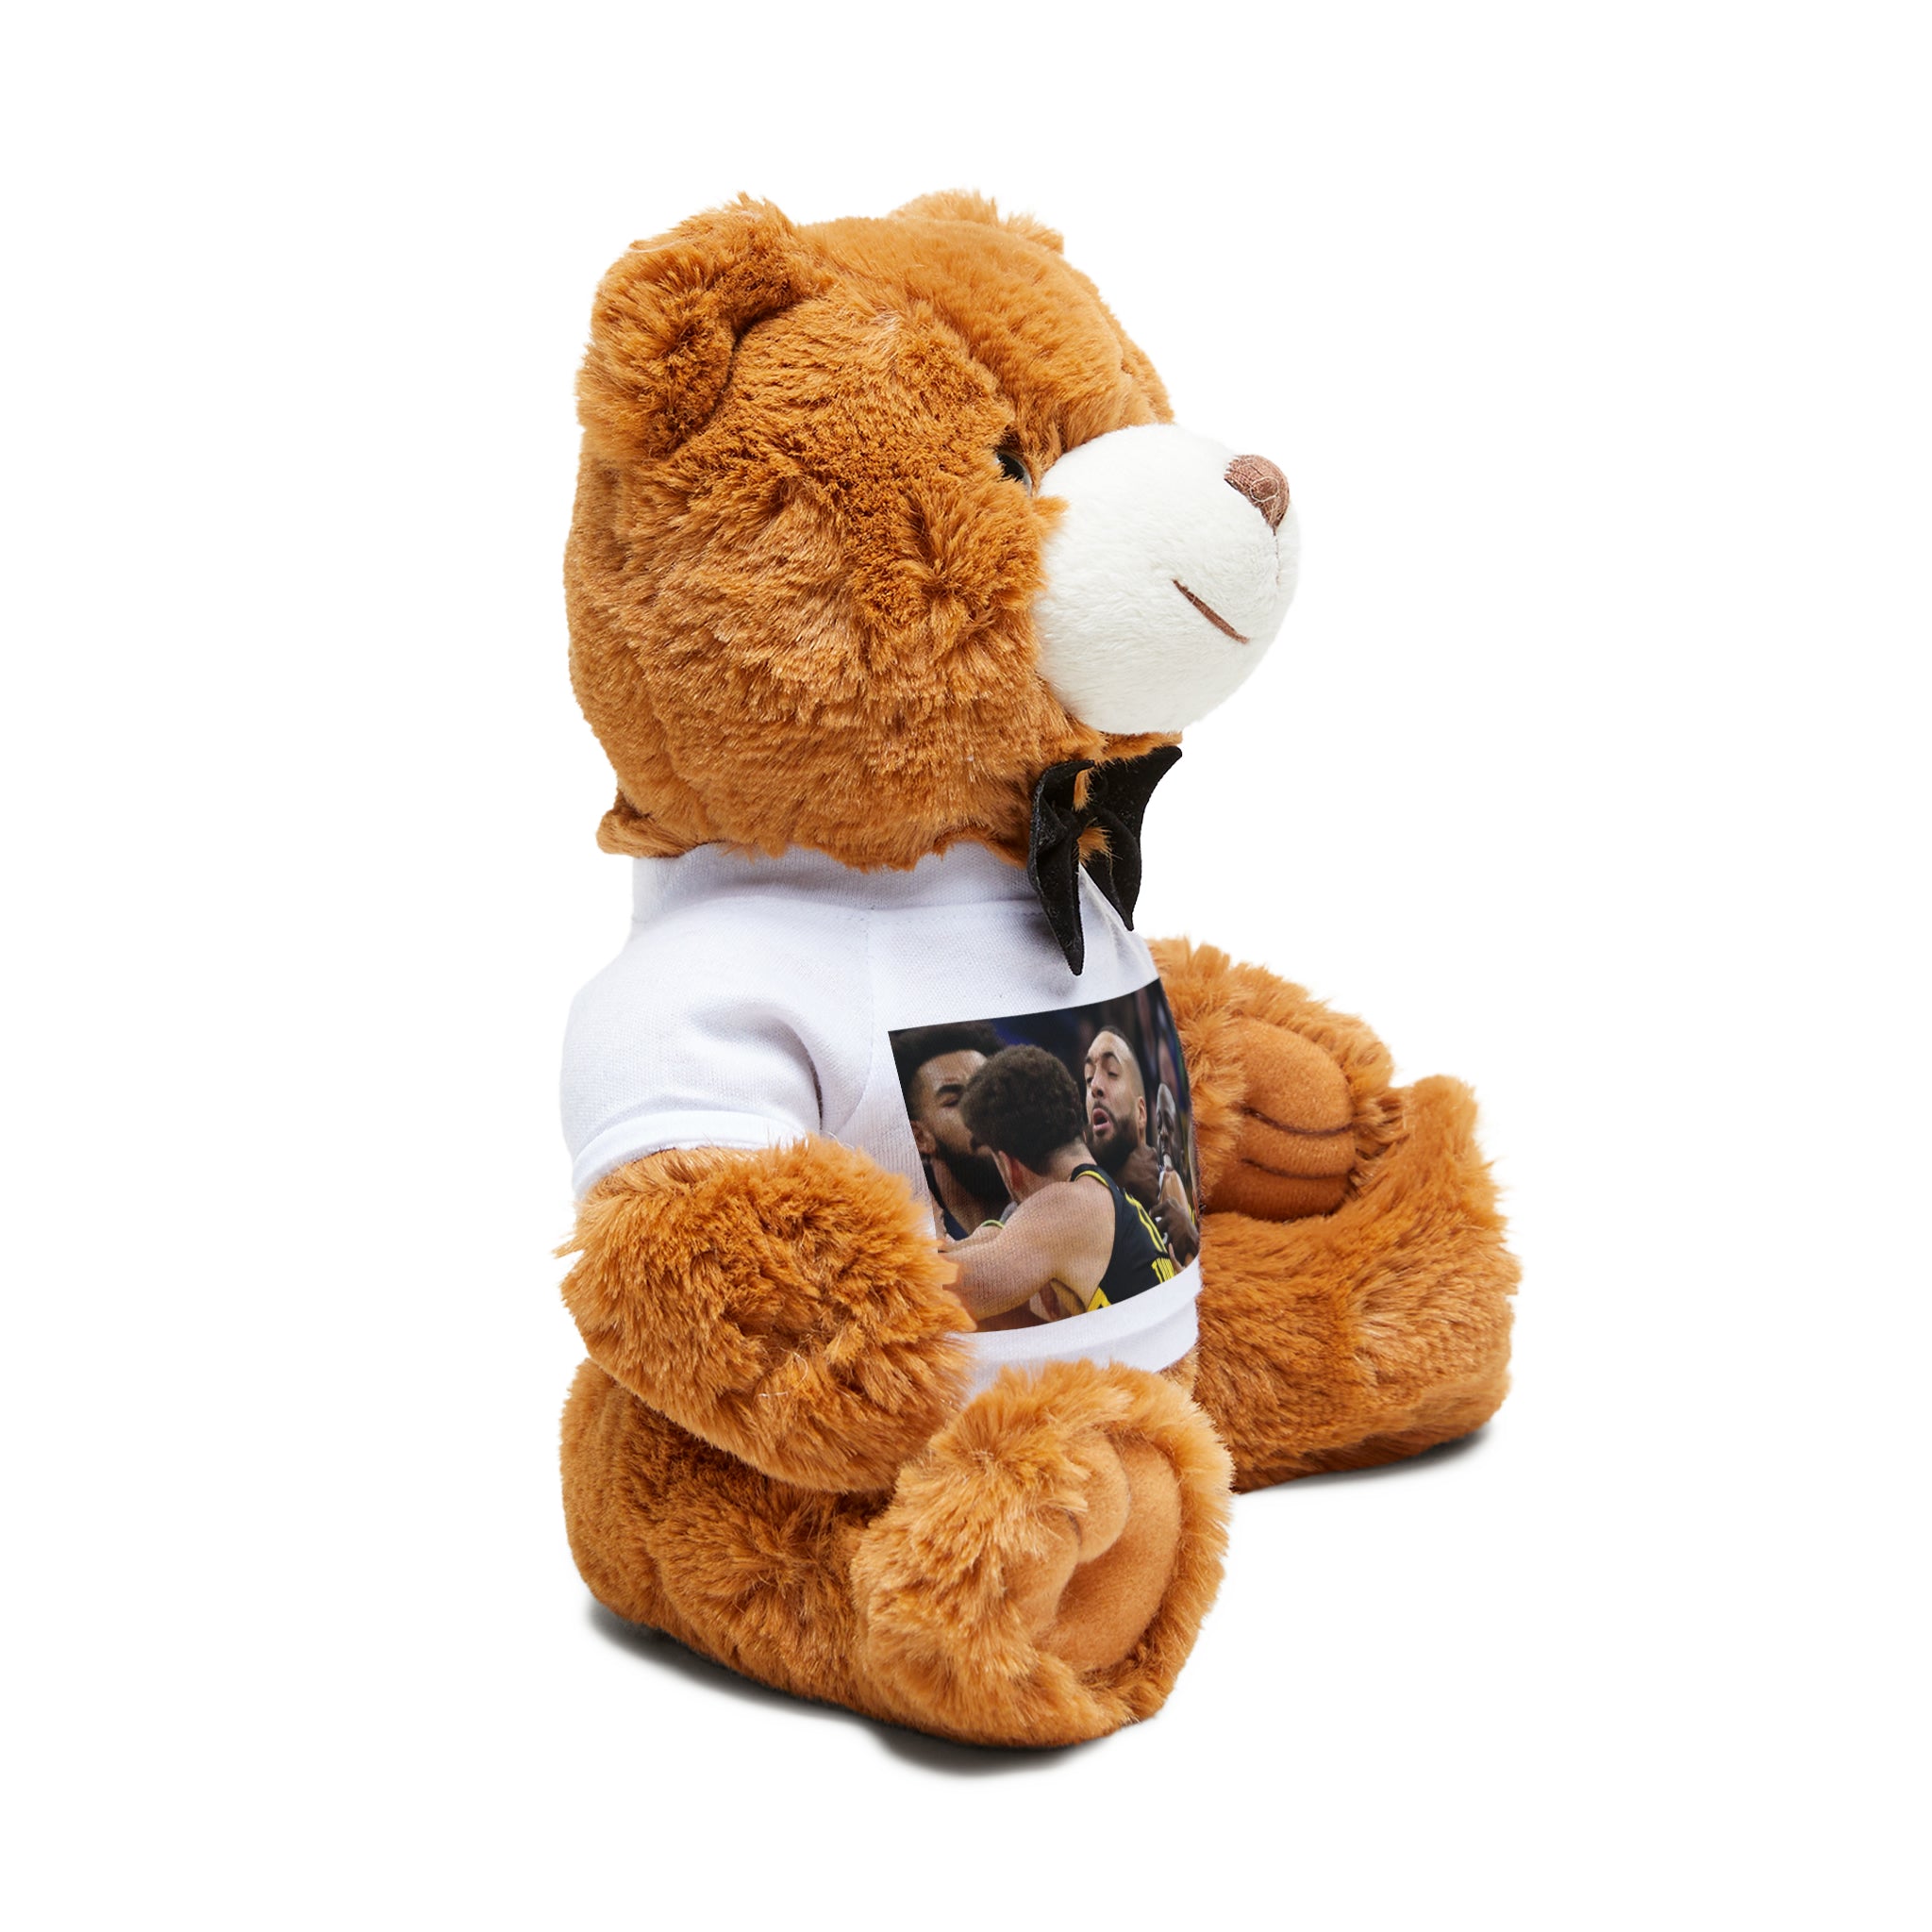 Bring Home the Laughs with 'On-Court Tussle' Profession Basketball Choke-Hold Funny Teddy Bear - Stylish Little Tee Wearing Teddy